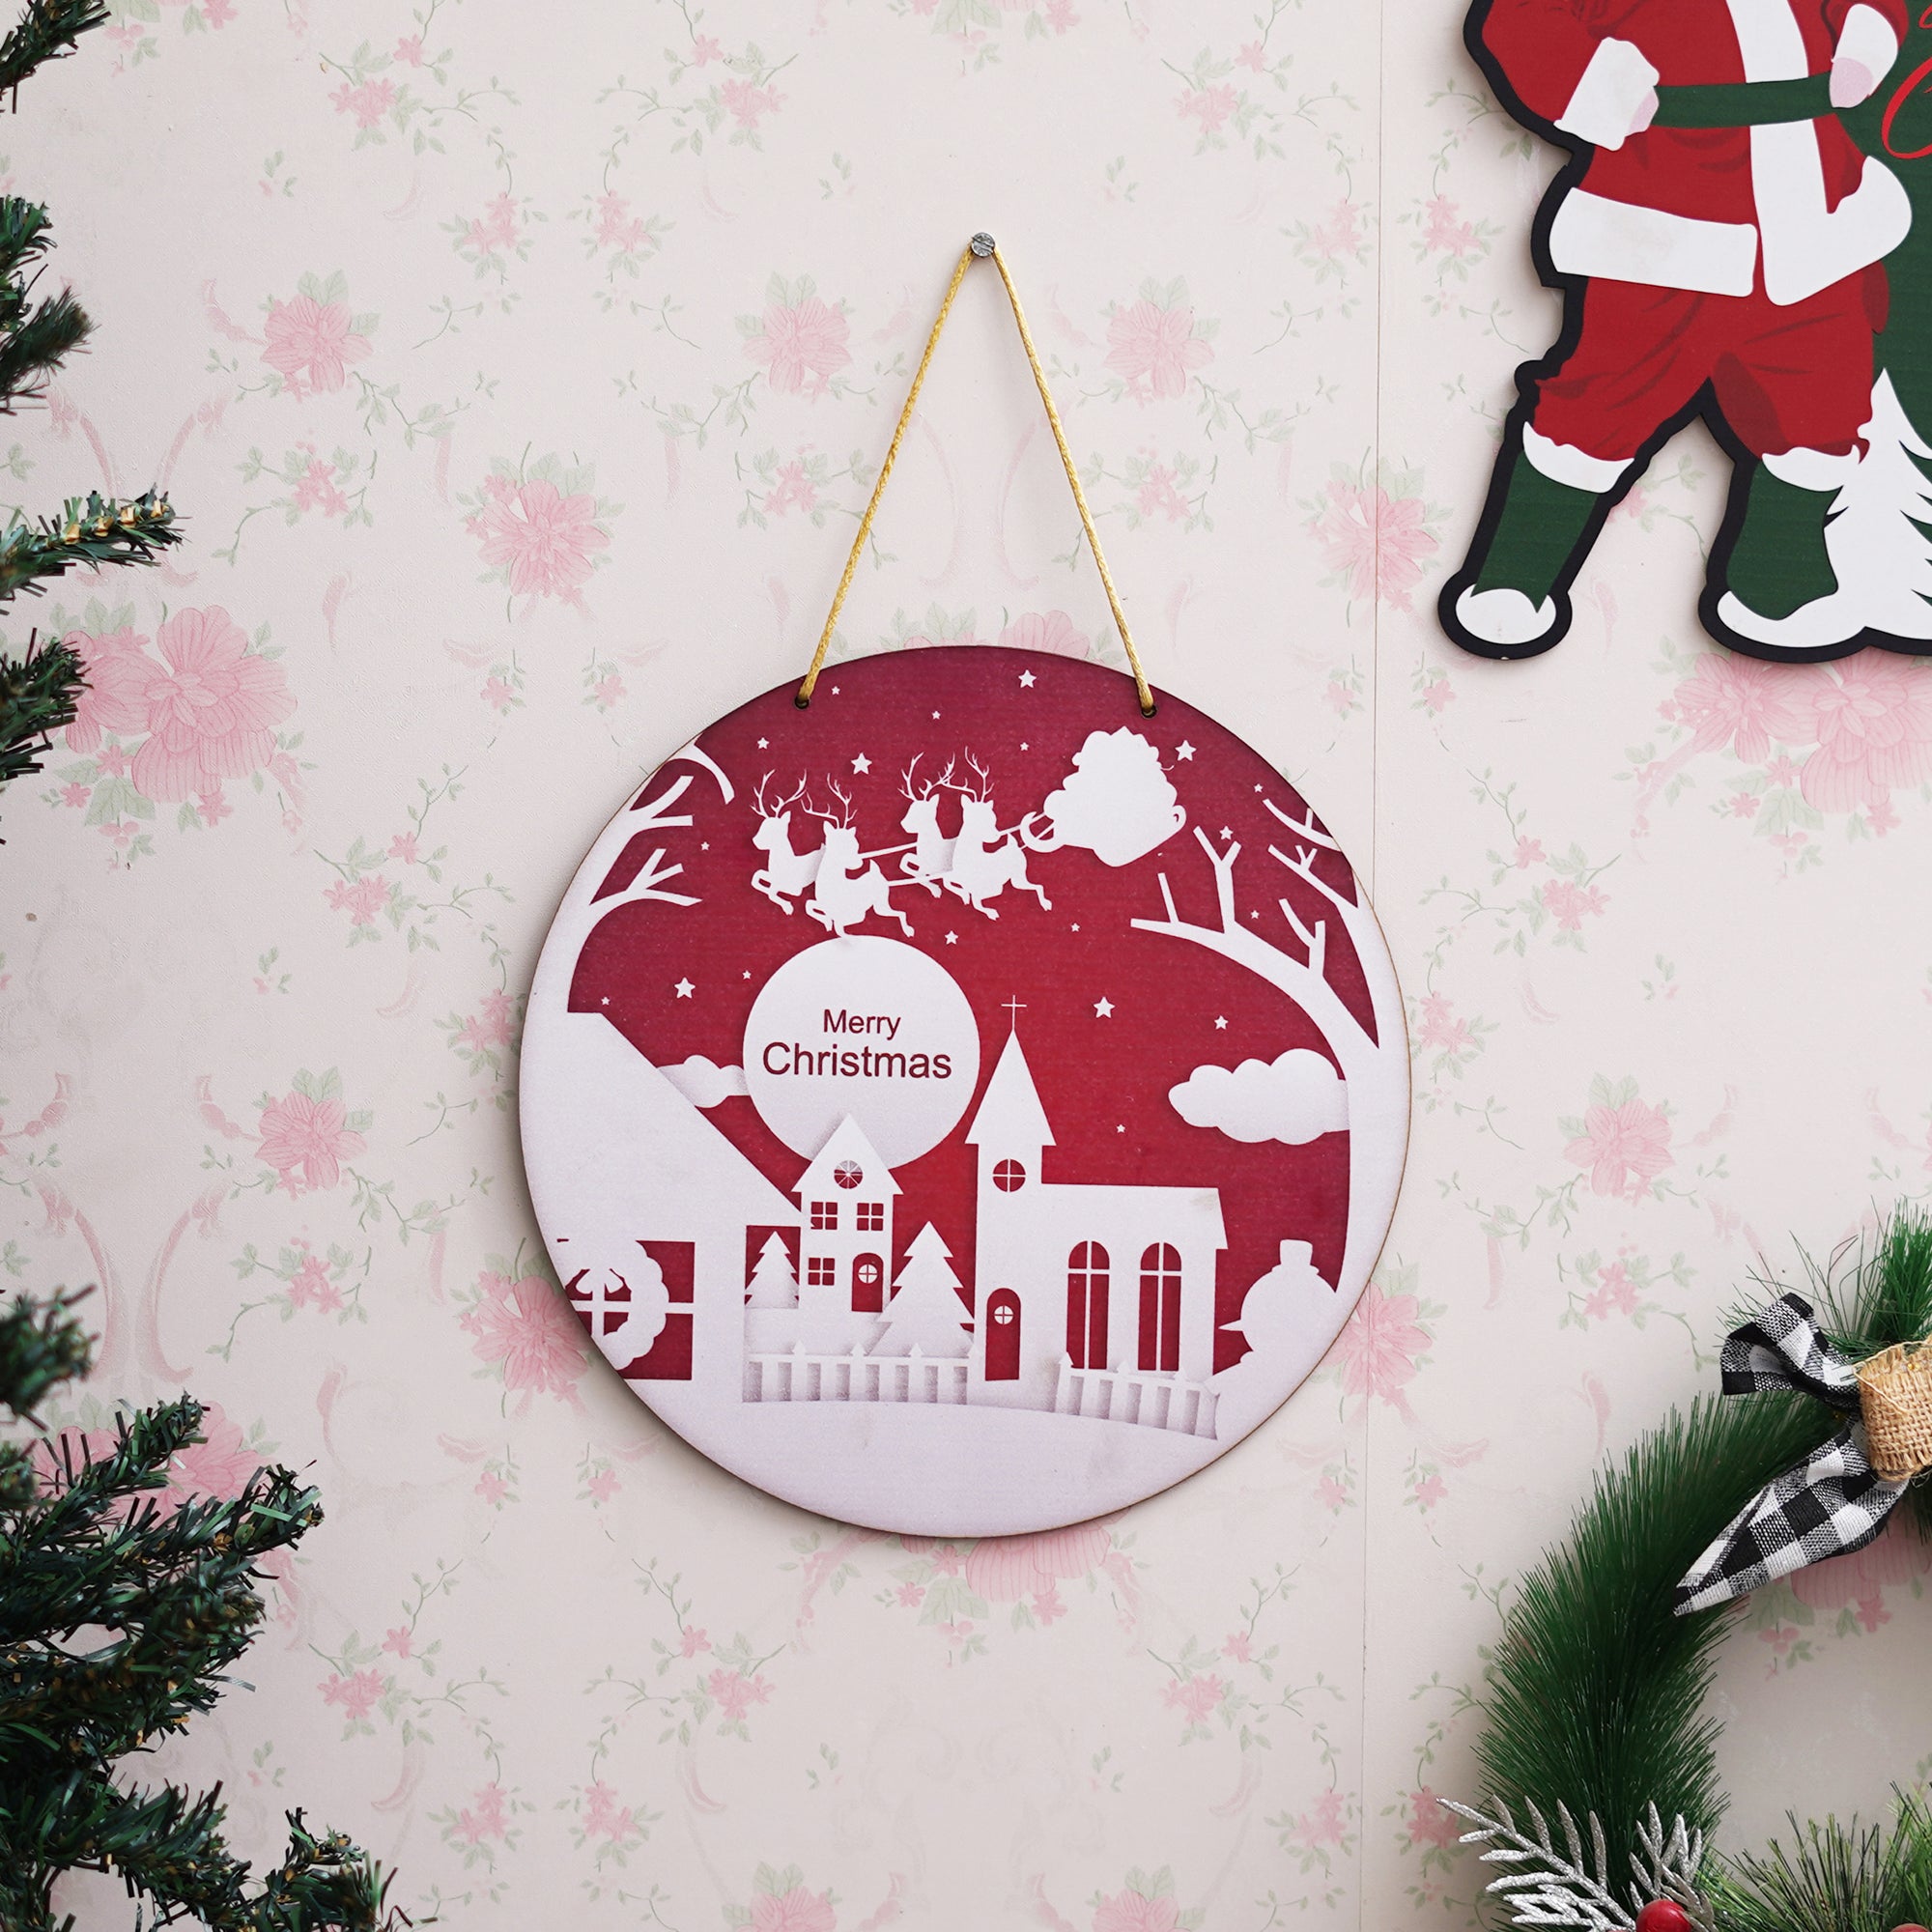 eCraftIndia Merry Christmas and Santa Claus with sleigh and reindeer Printed Door Wall Hanging for Home and Christmas Decoration (Red, White)